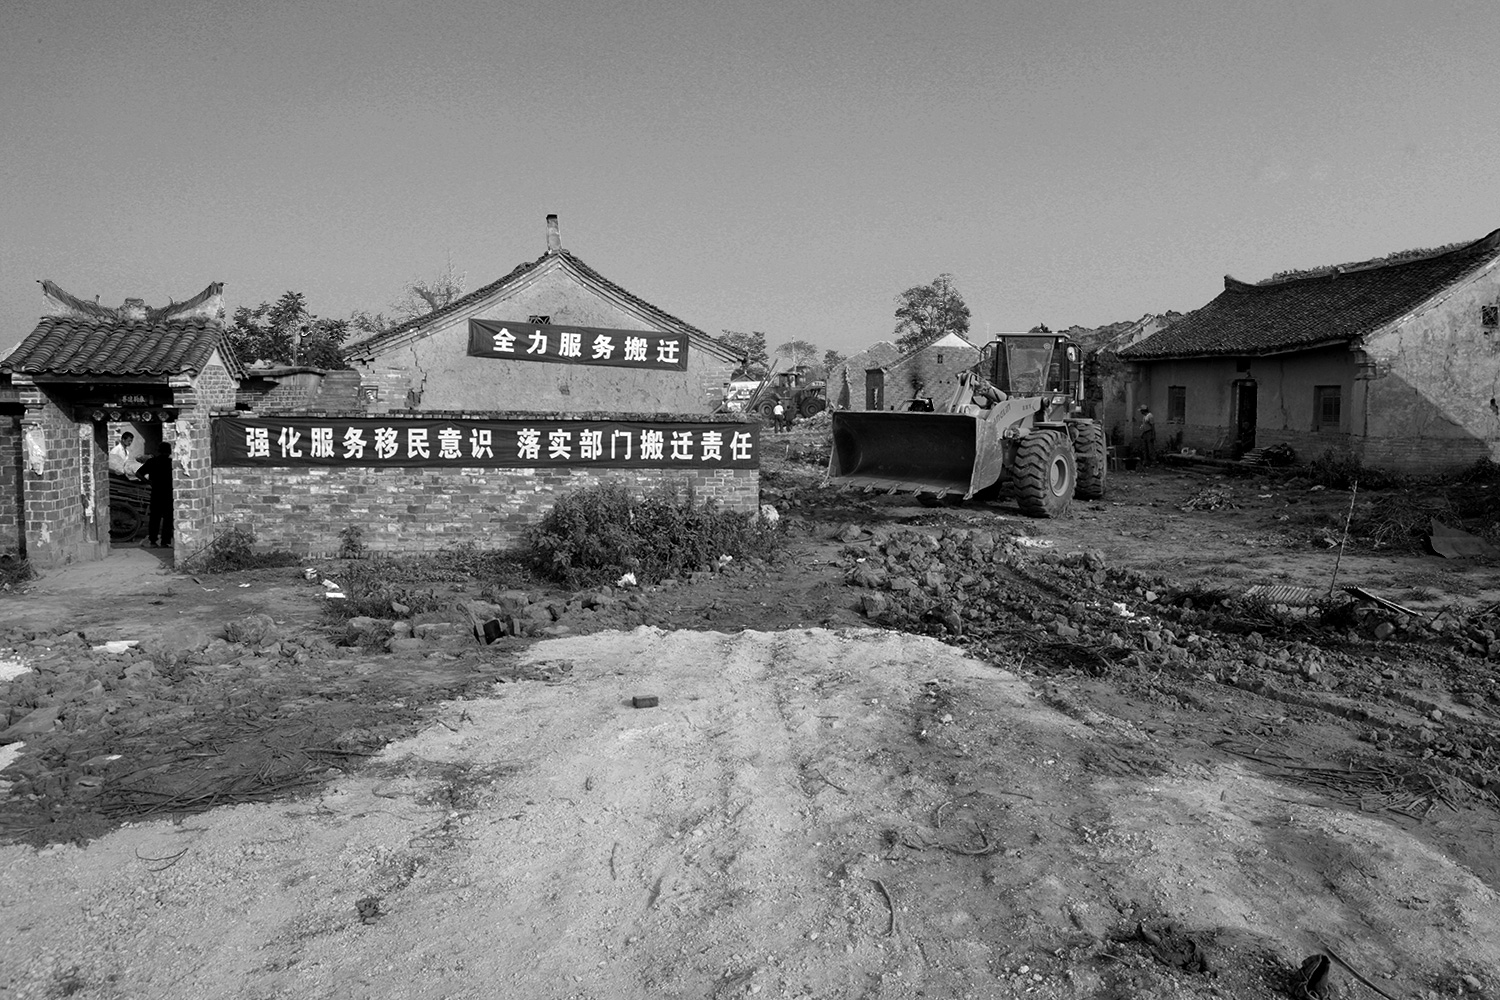 With the village largely empty of people, a bulldozer flattens a piece of ground in the village of Jinhe, August 2011.